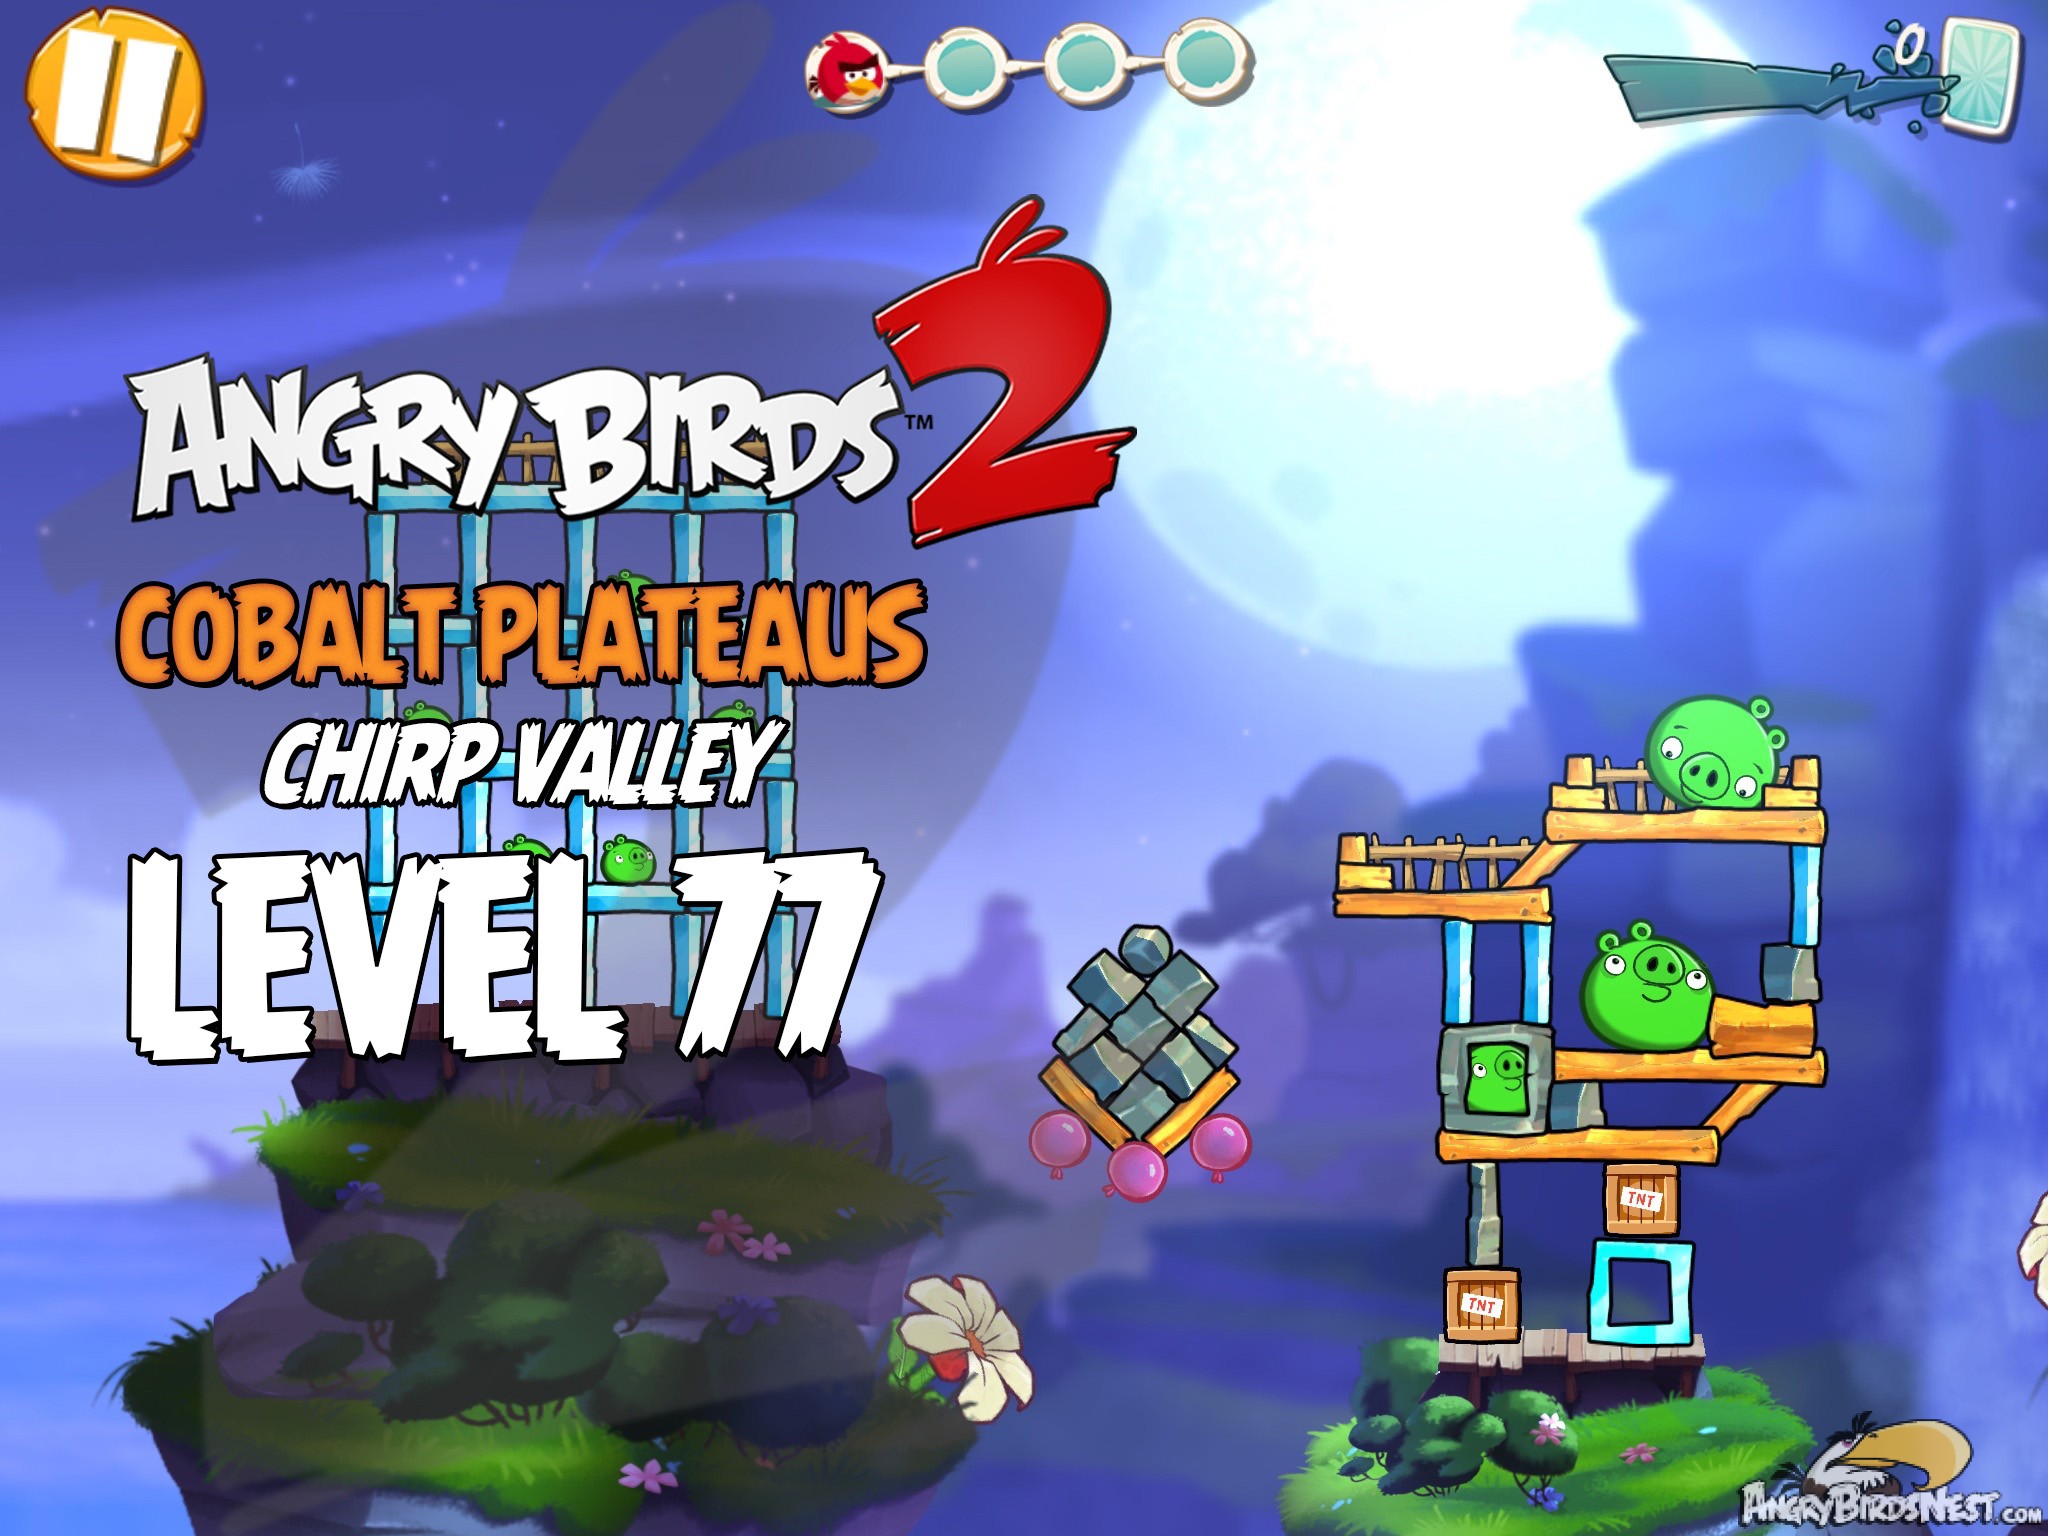 Angry Birds 2 Cobalt Plateaus Chirp Valley Level 77